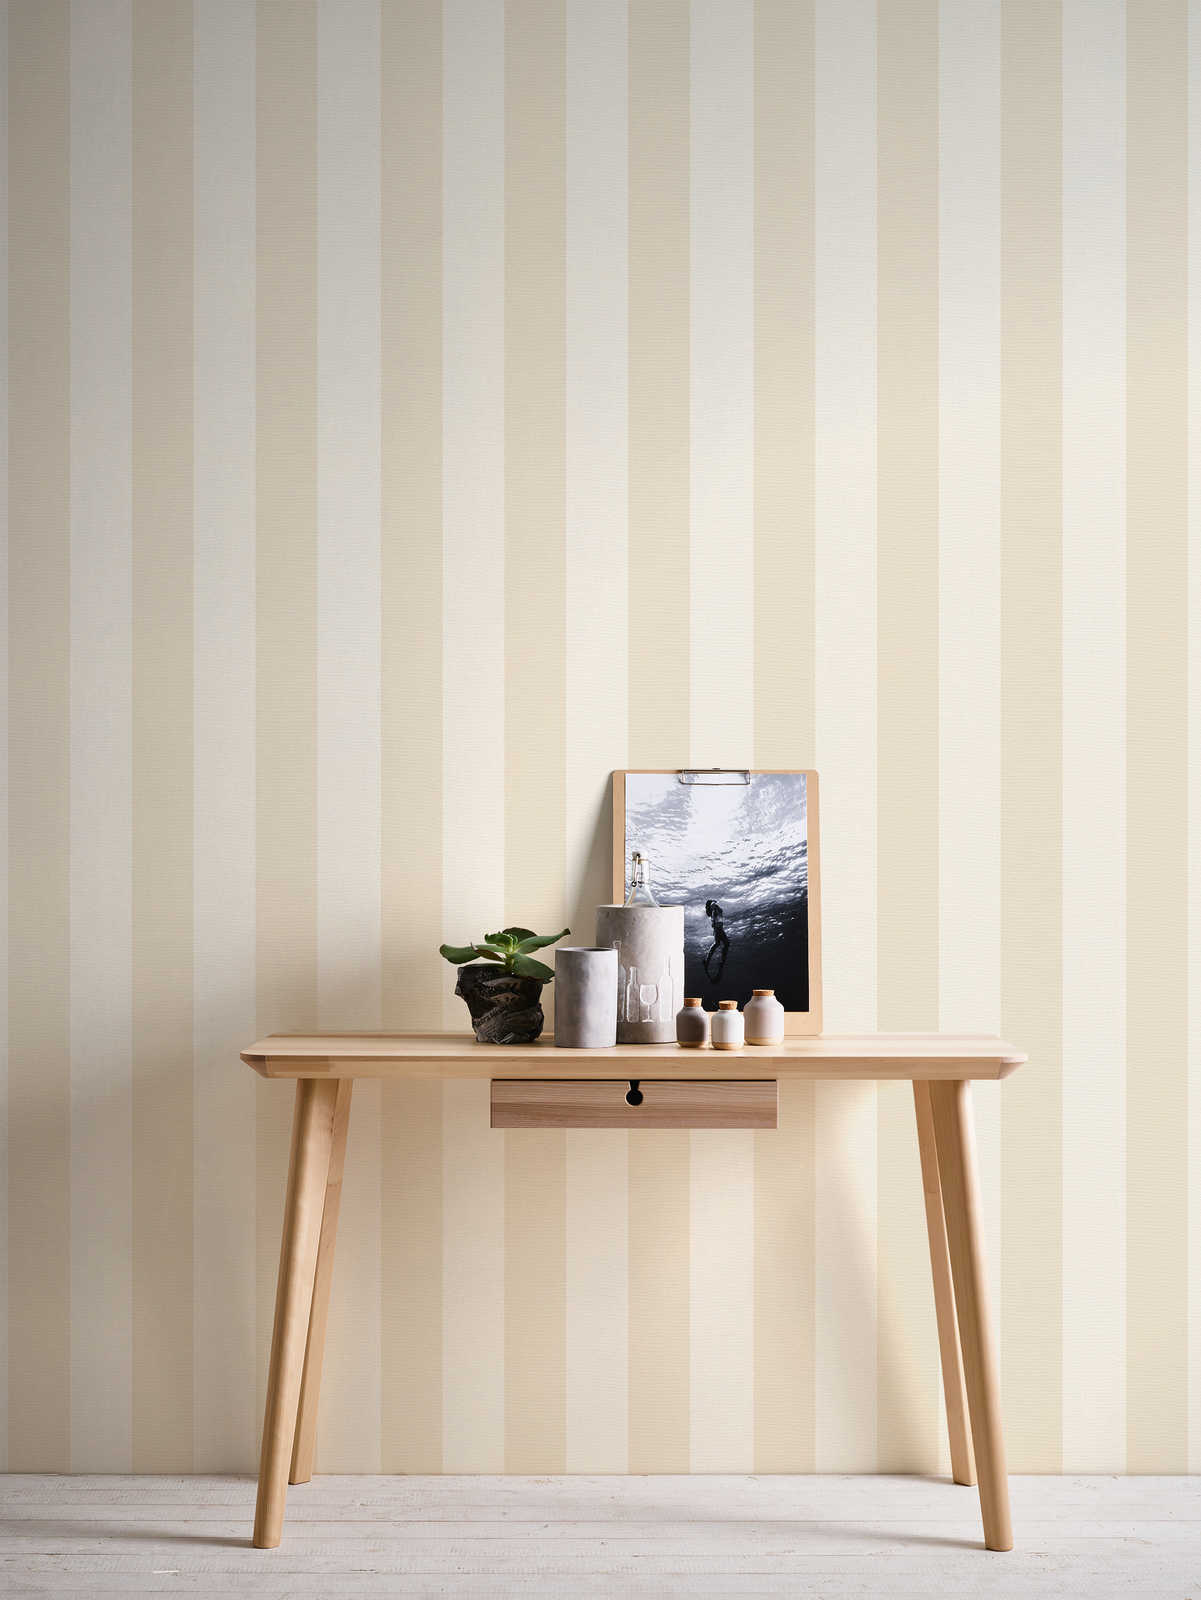             Non-woven wallpaper with stripes and linen look PVC-free - beige, white
        